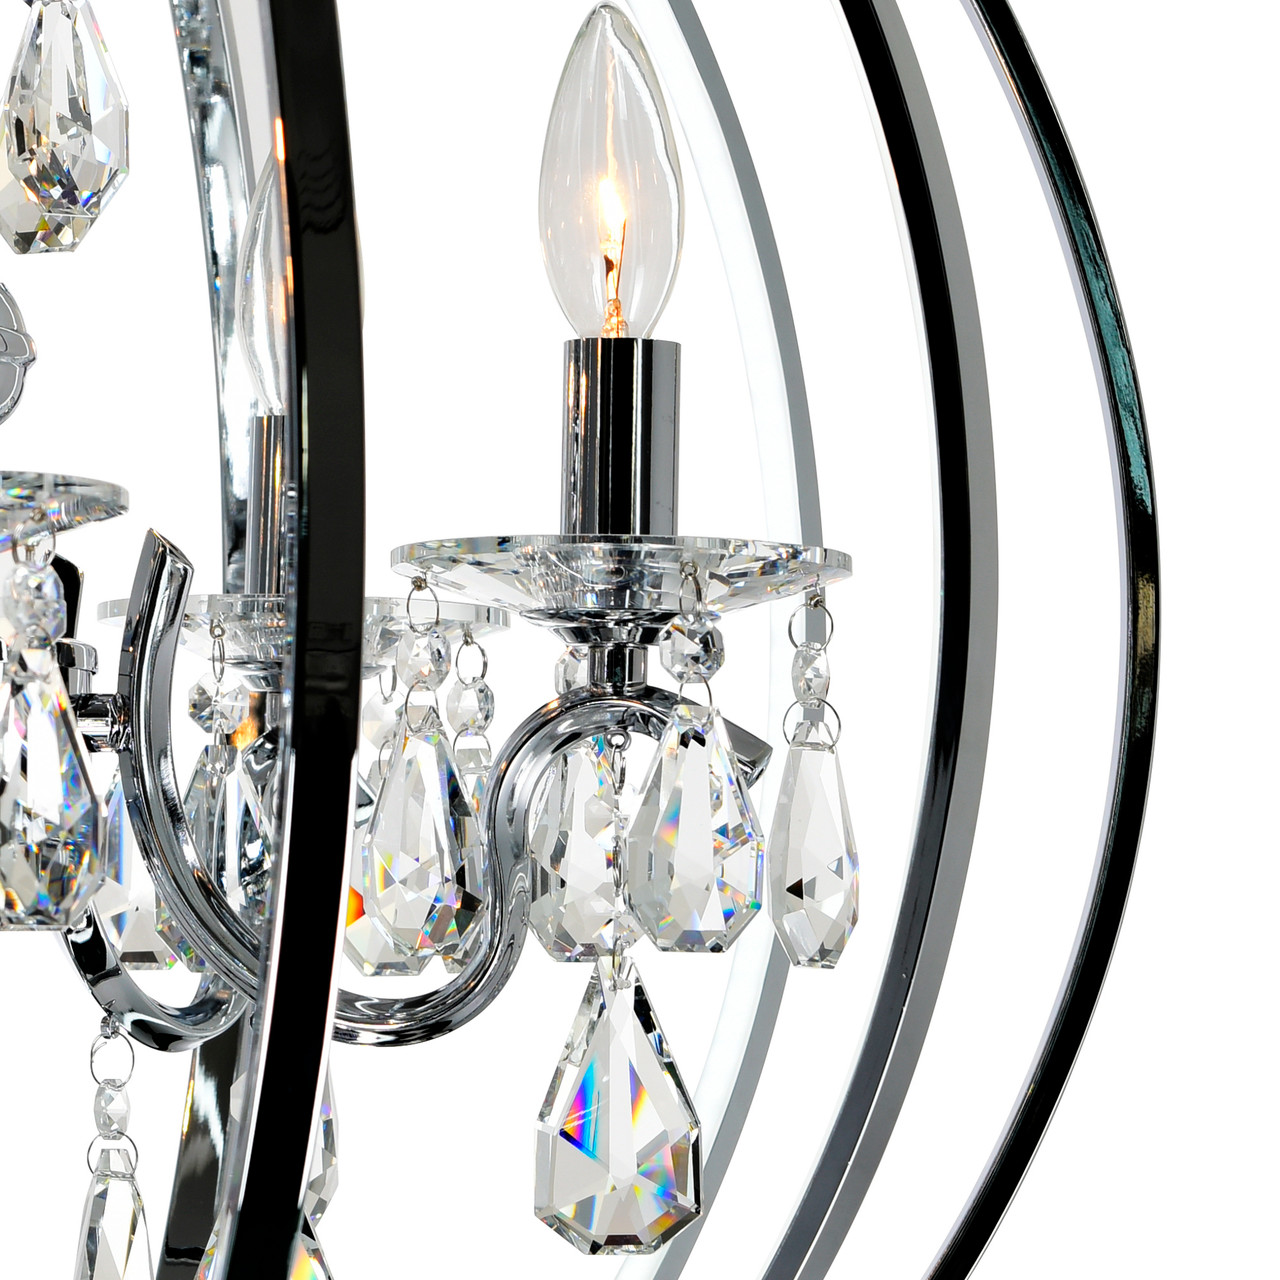 CWI LIGHTING 5025P22C-5 5 Light Up Chandelier with Chrome finish